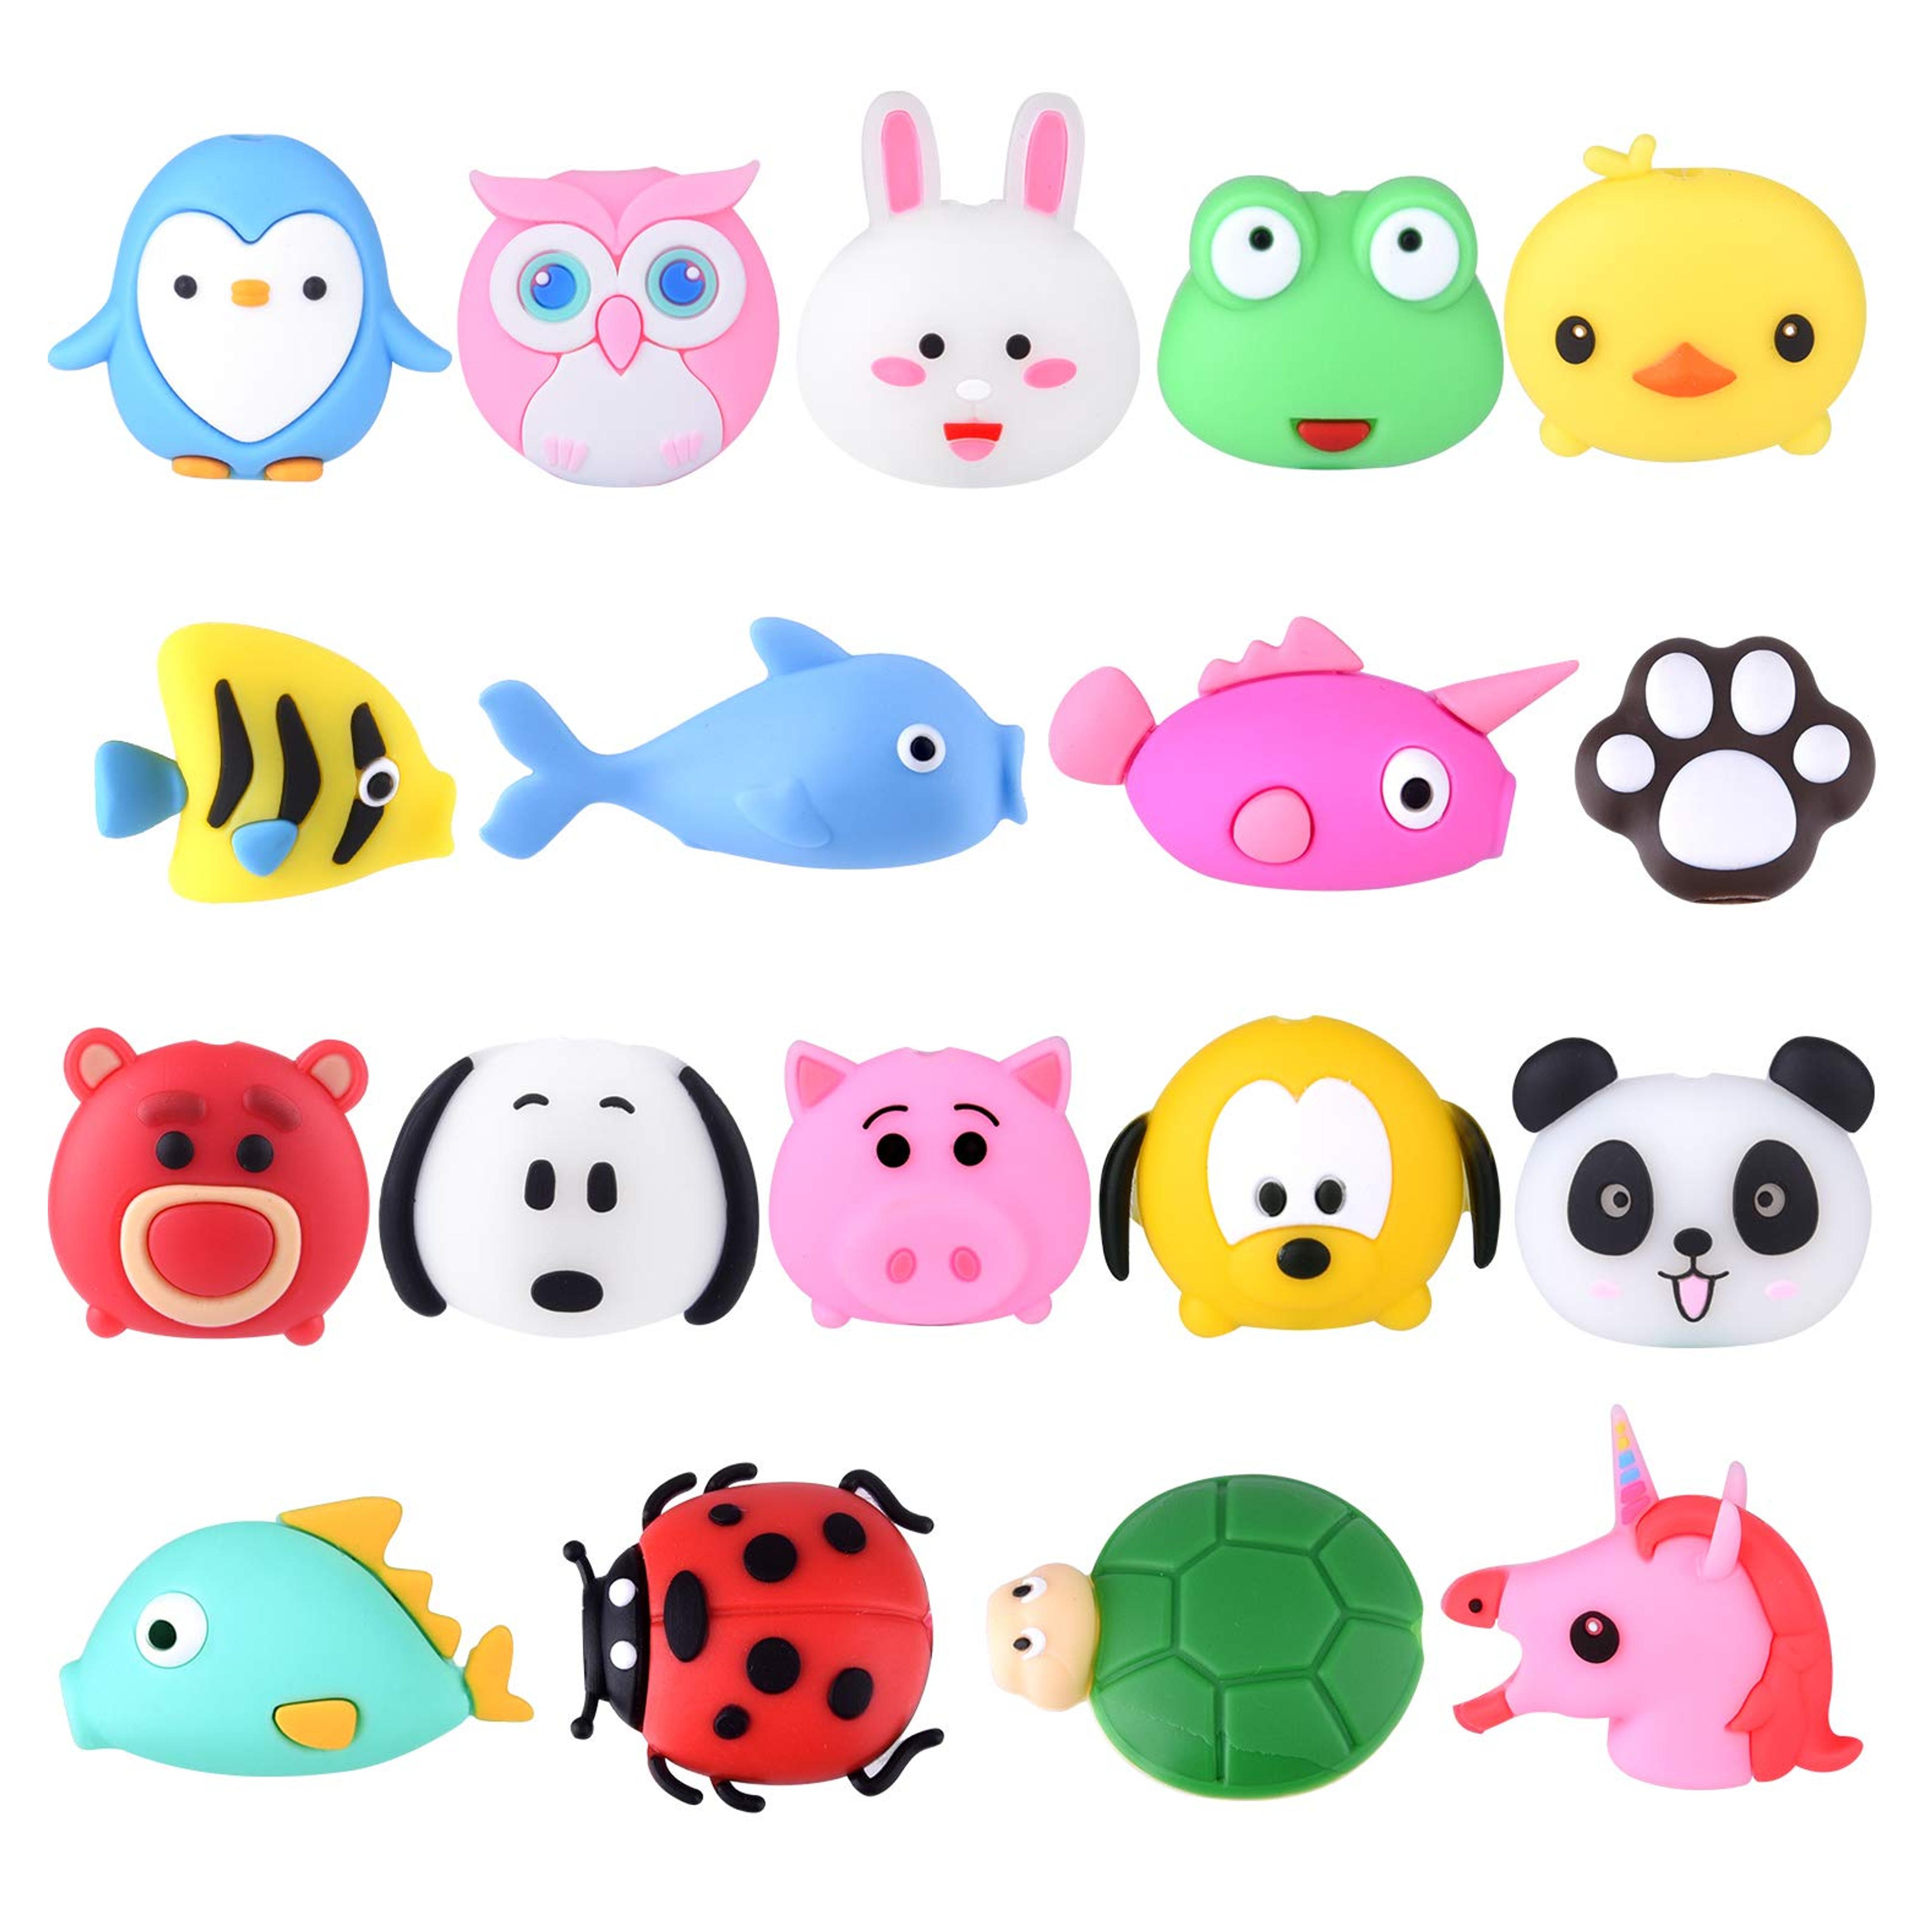 TUPARKA 18pcs Protege Cable for iPhone/iPad USB Lightning Cable, Plastic Cute Unicorn Fish Animal Charging Cable Saver, Phone Accessory Protect USB Charger